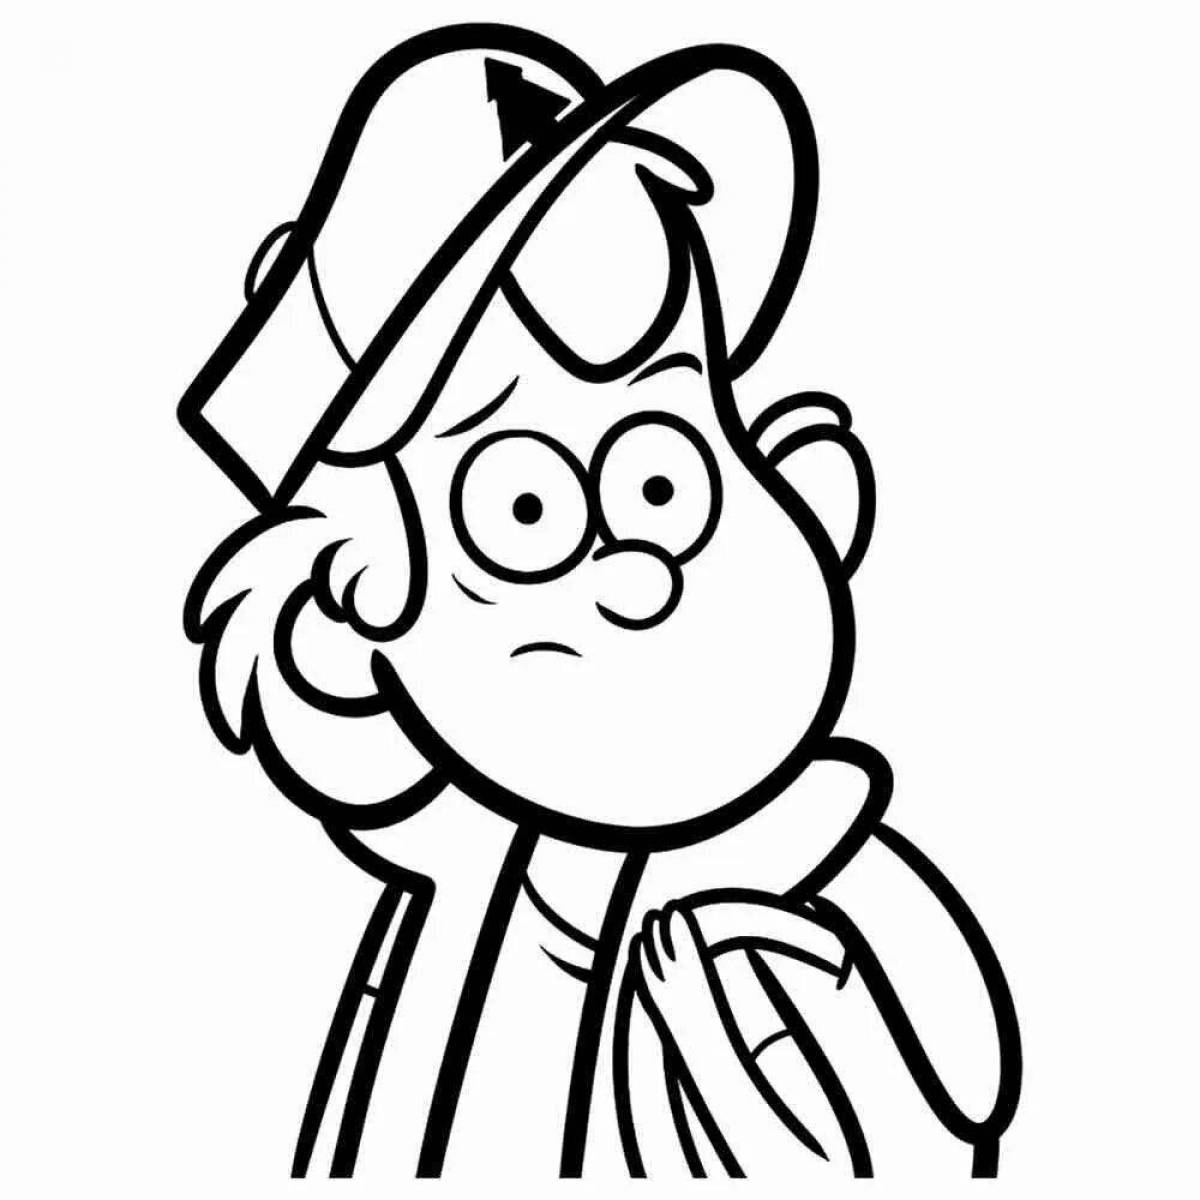 Dipper from gravity falls #6